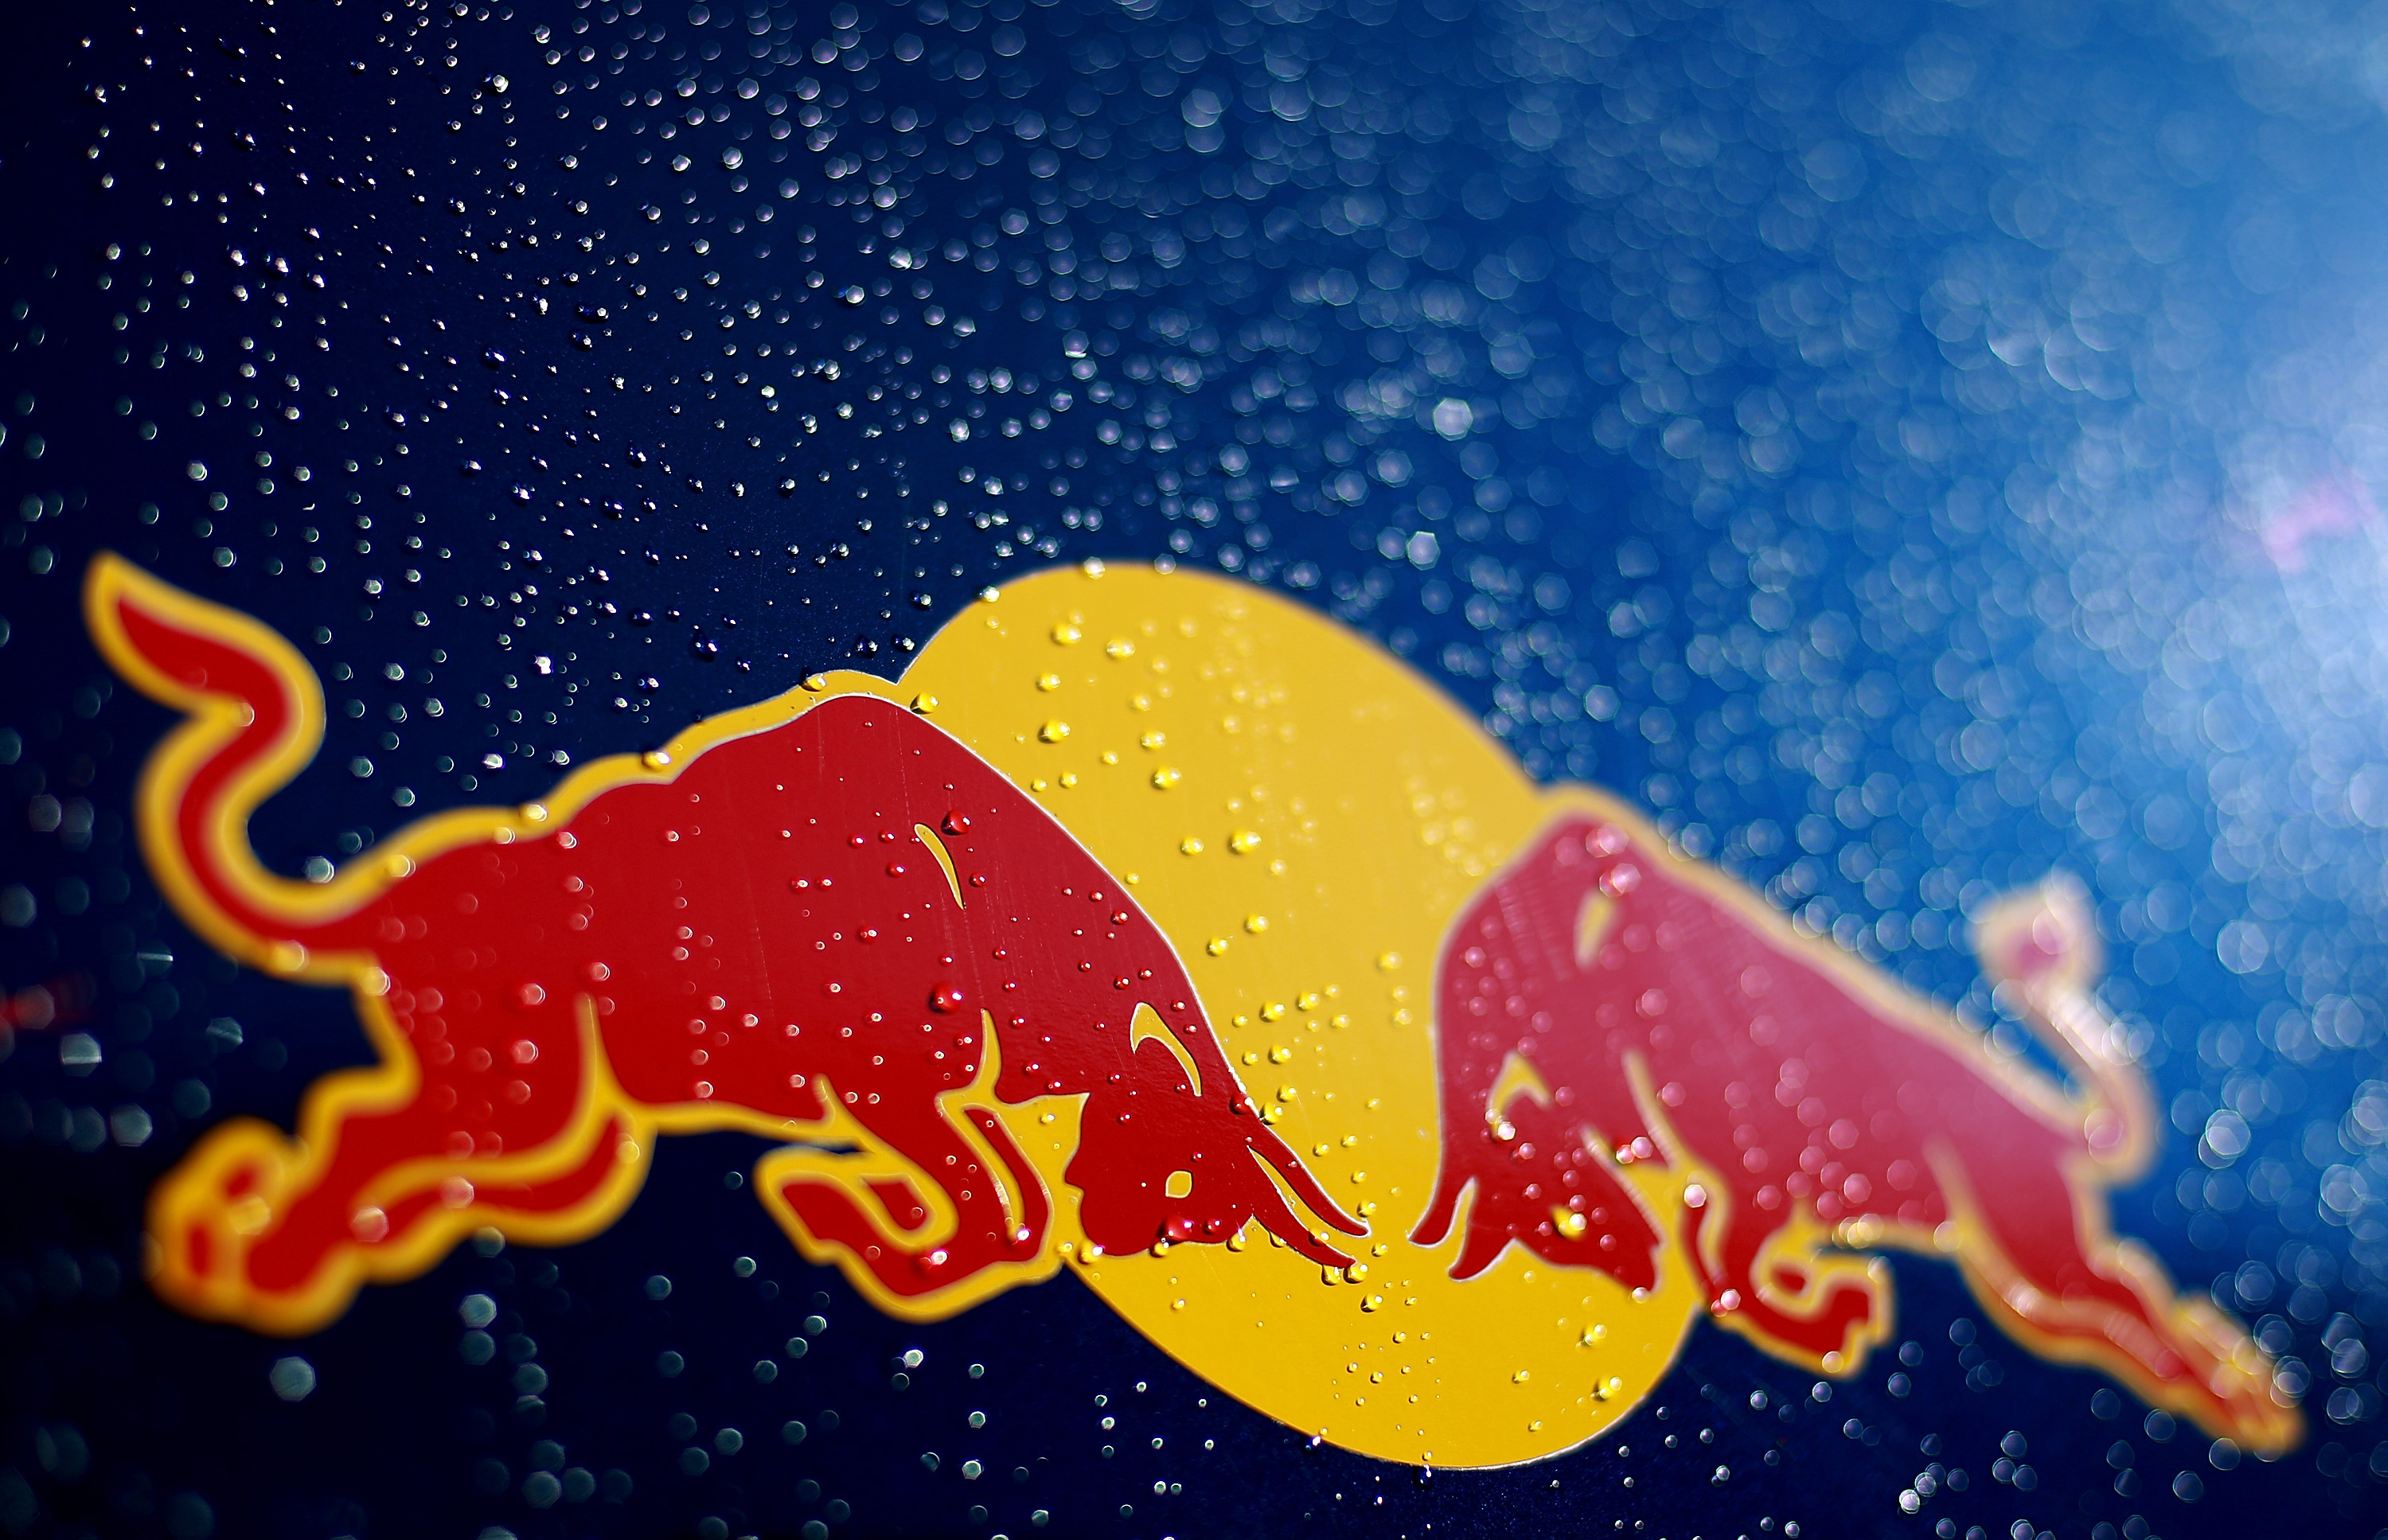 red bull wallpaper hd,red bull,illustration,font,space,graphics